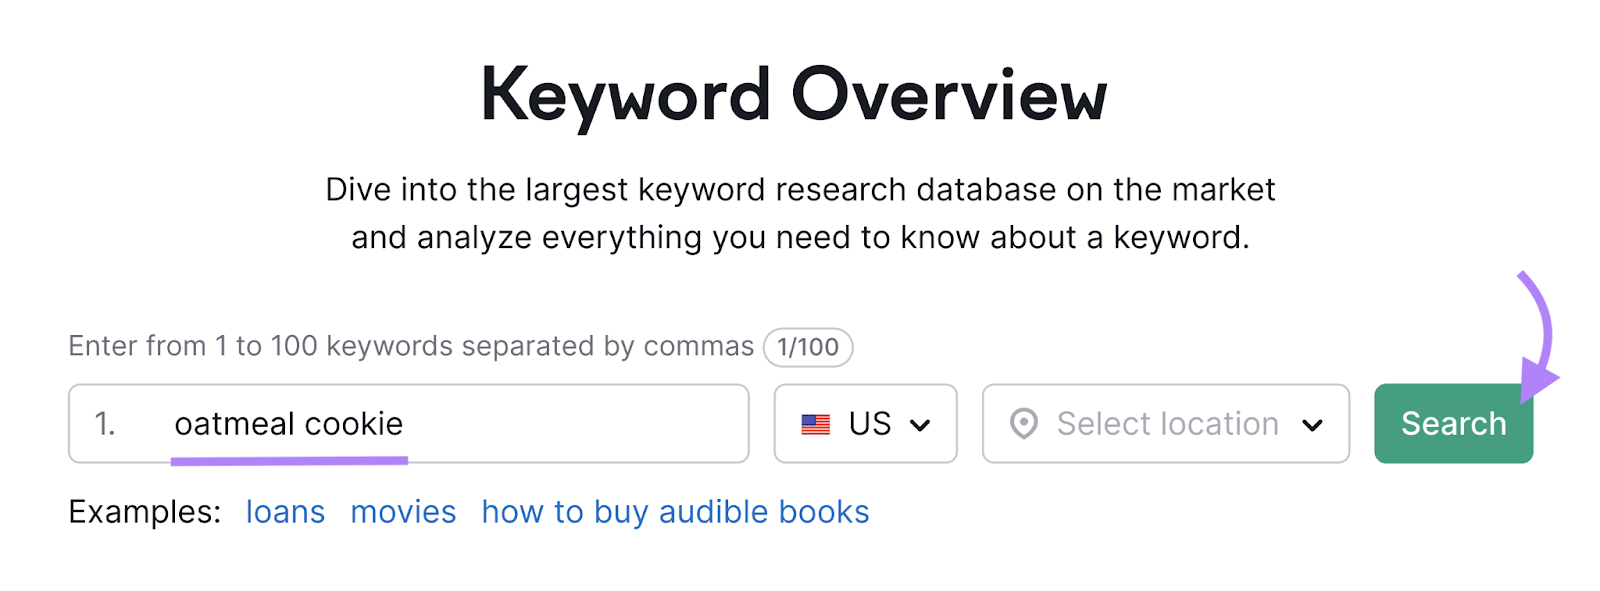 search for "oatmeal cookie" in Keyword Overview tool